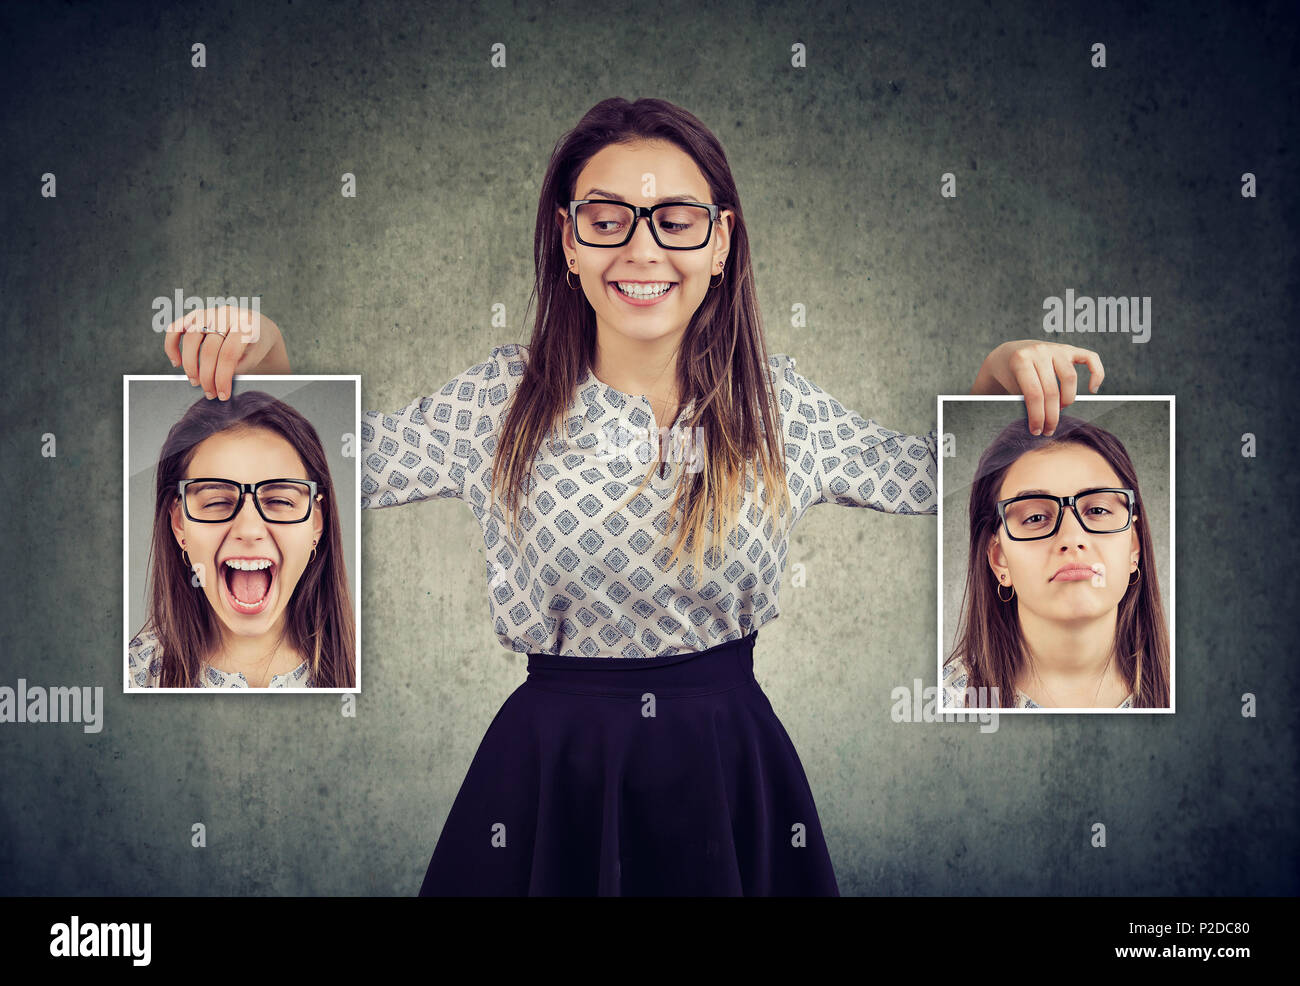 Happy woman holding two different face emotion masks of herself Stock Photo